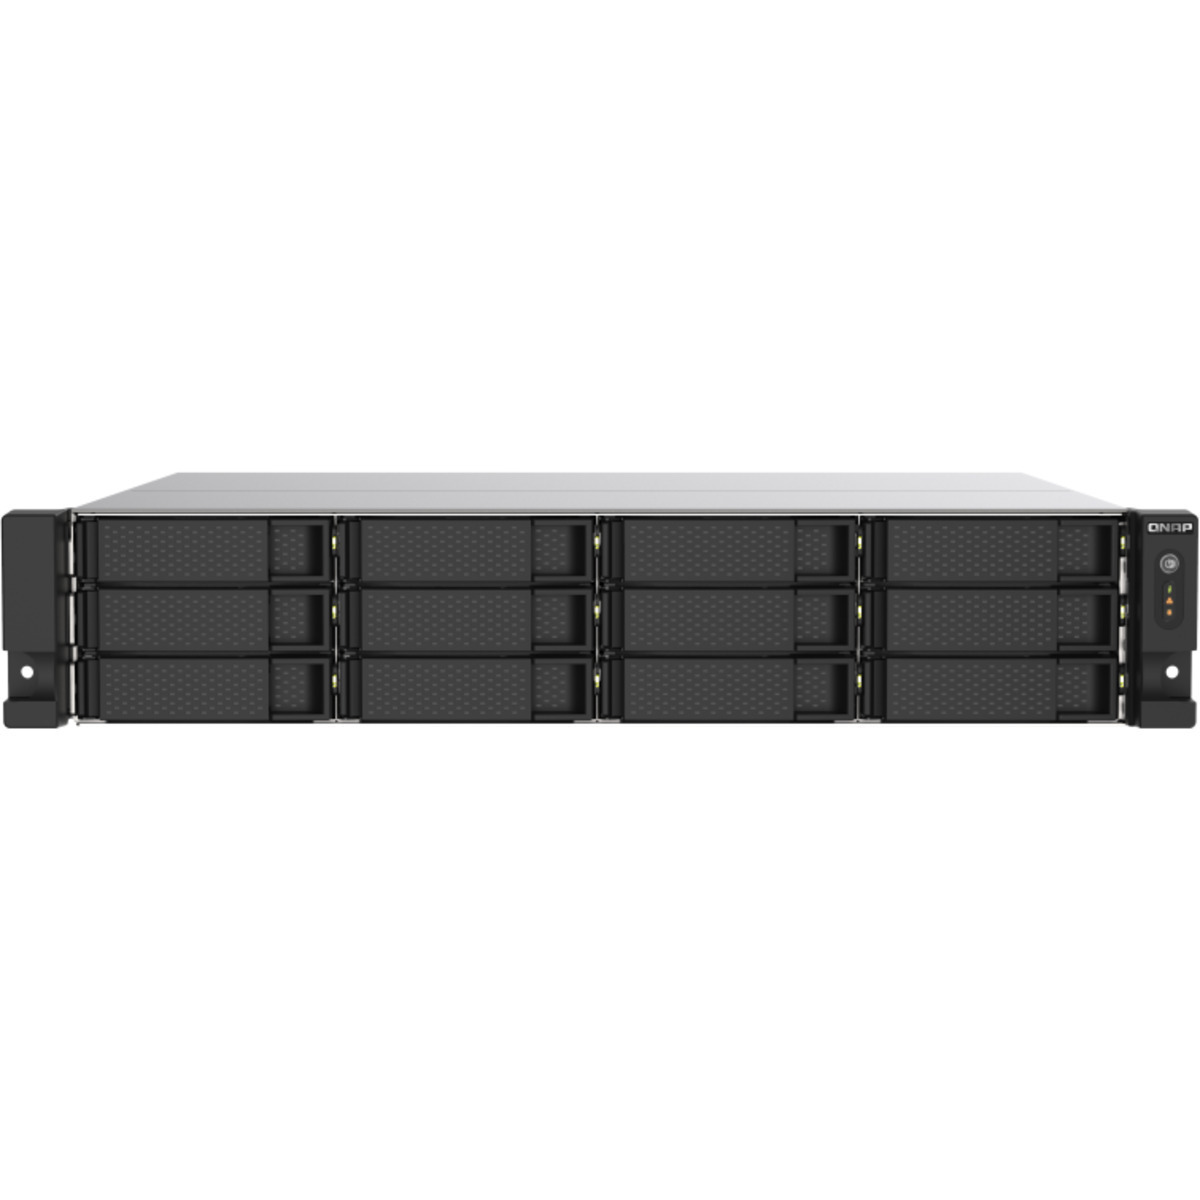 QNAP TS-1273AU-RP 160tb 12-Bay RackMount Multimedia / Power User / Business NAS - Network Attached Storage Device 8x20tb Seagate EXOS X20 ST20000NM007D 3.5 7200rpm SATA 6Gb/s HDD ENTERPRISE Class Drives Installed - Burn-In Tested - FREE RAM UPGRADE TS-1273AU-RP